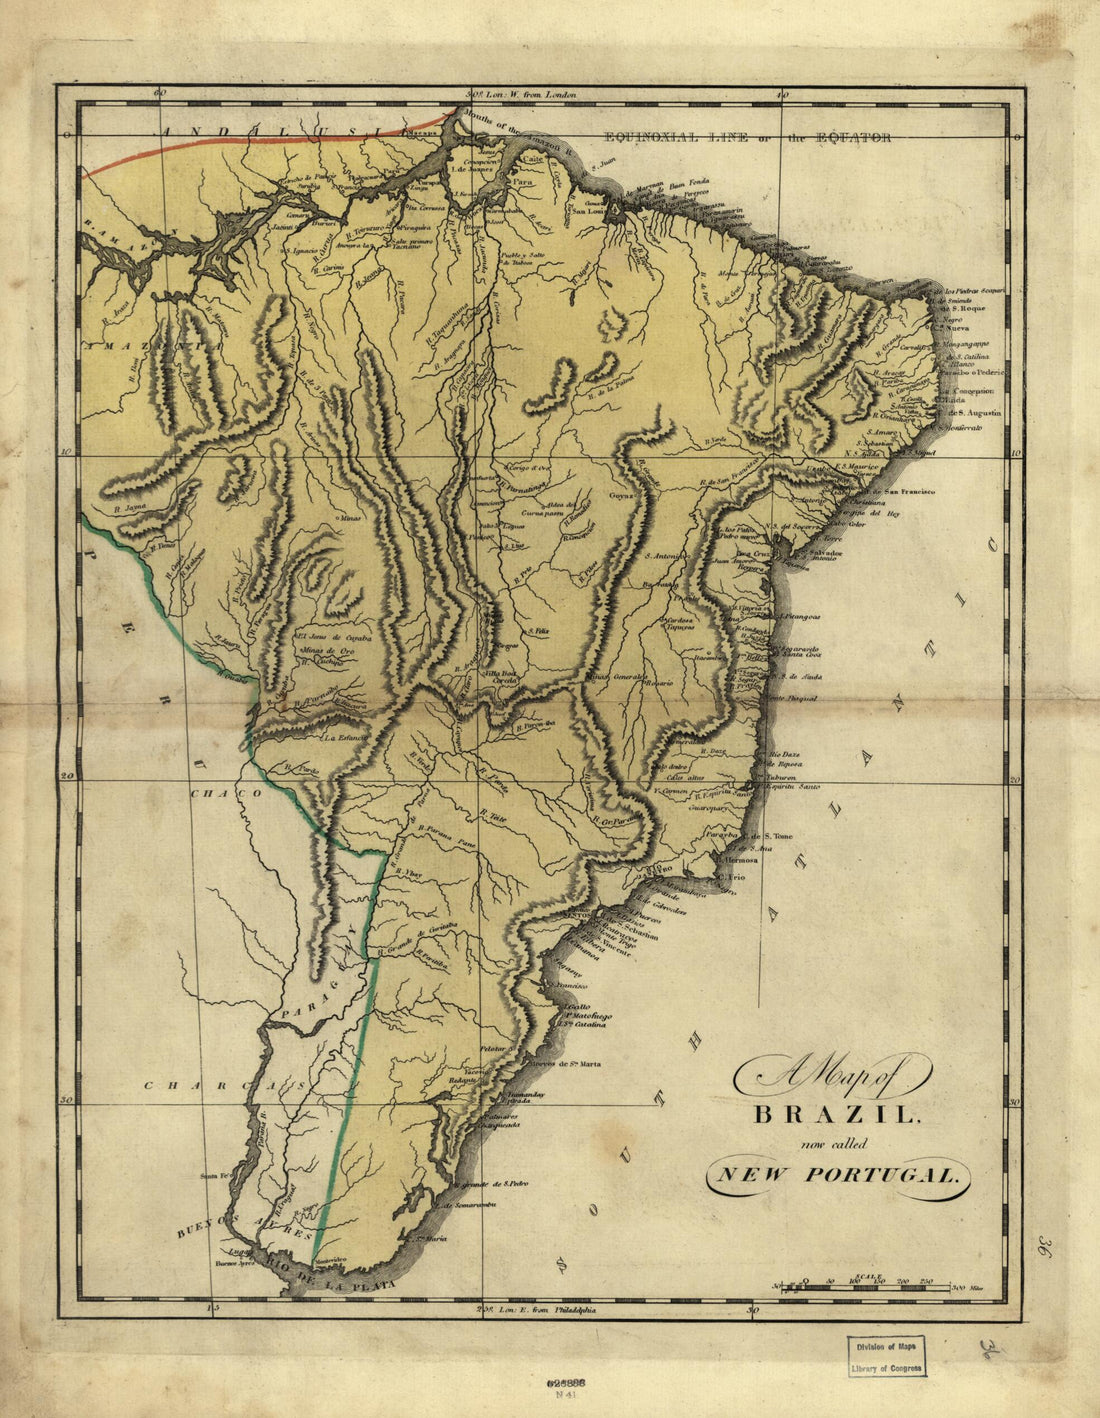 This old map of A Map of Brazil, Now Called New Portugal from 1814 was created by Mathew Carey in 1814